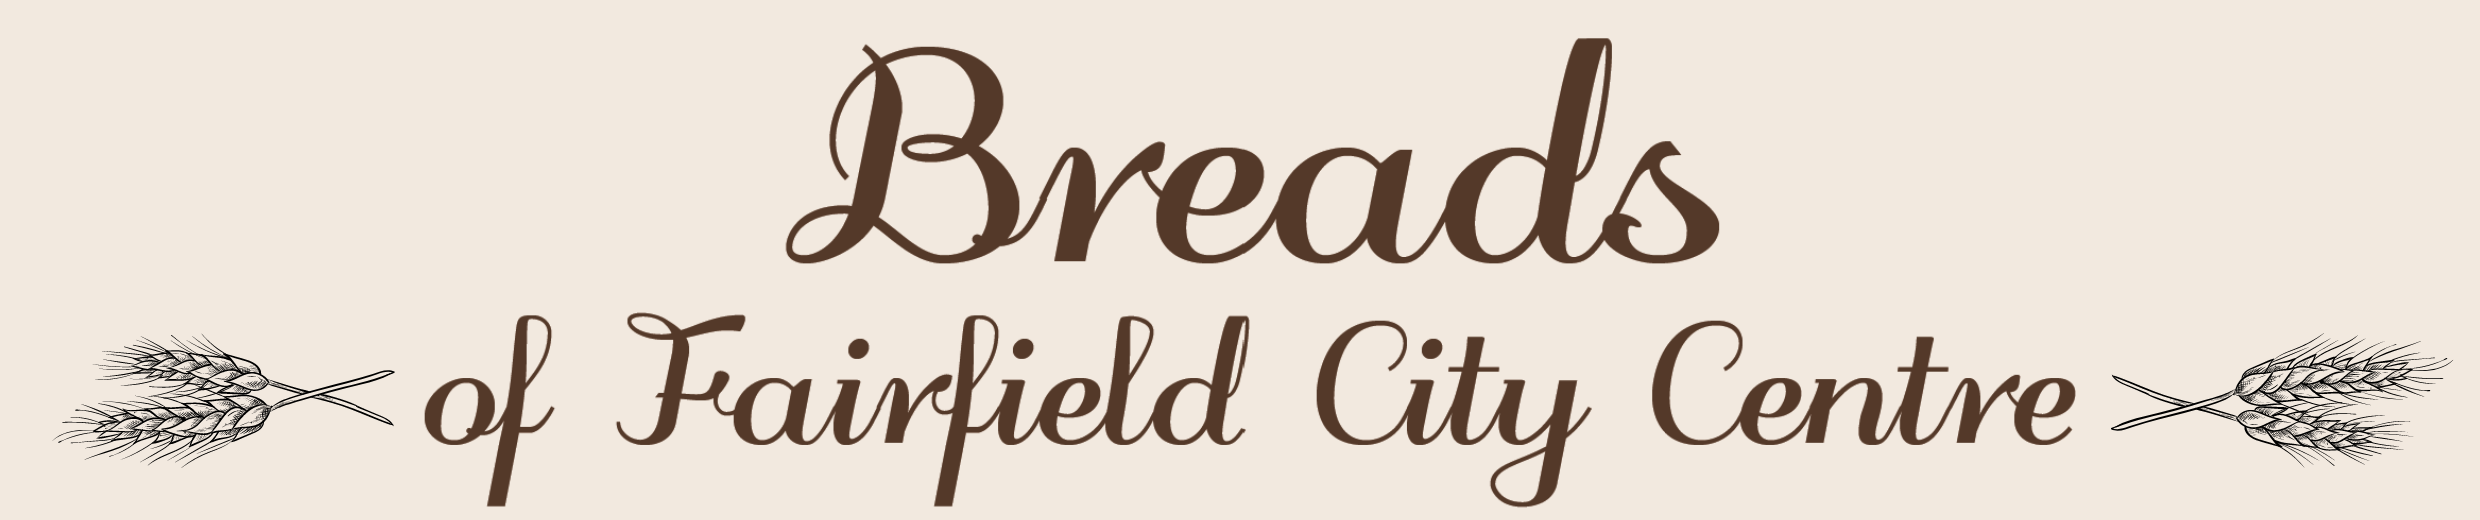 Breads of Fairfield City Centre website banner.png